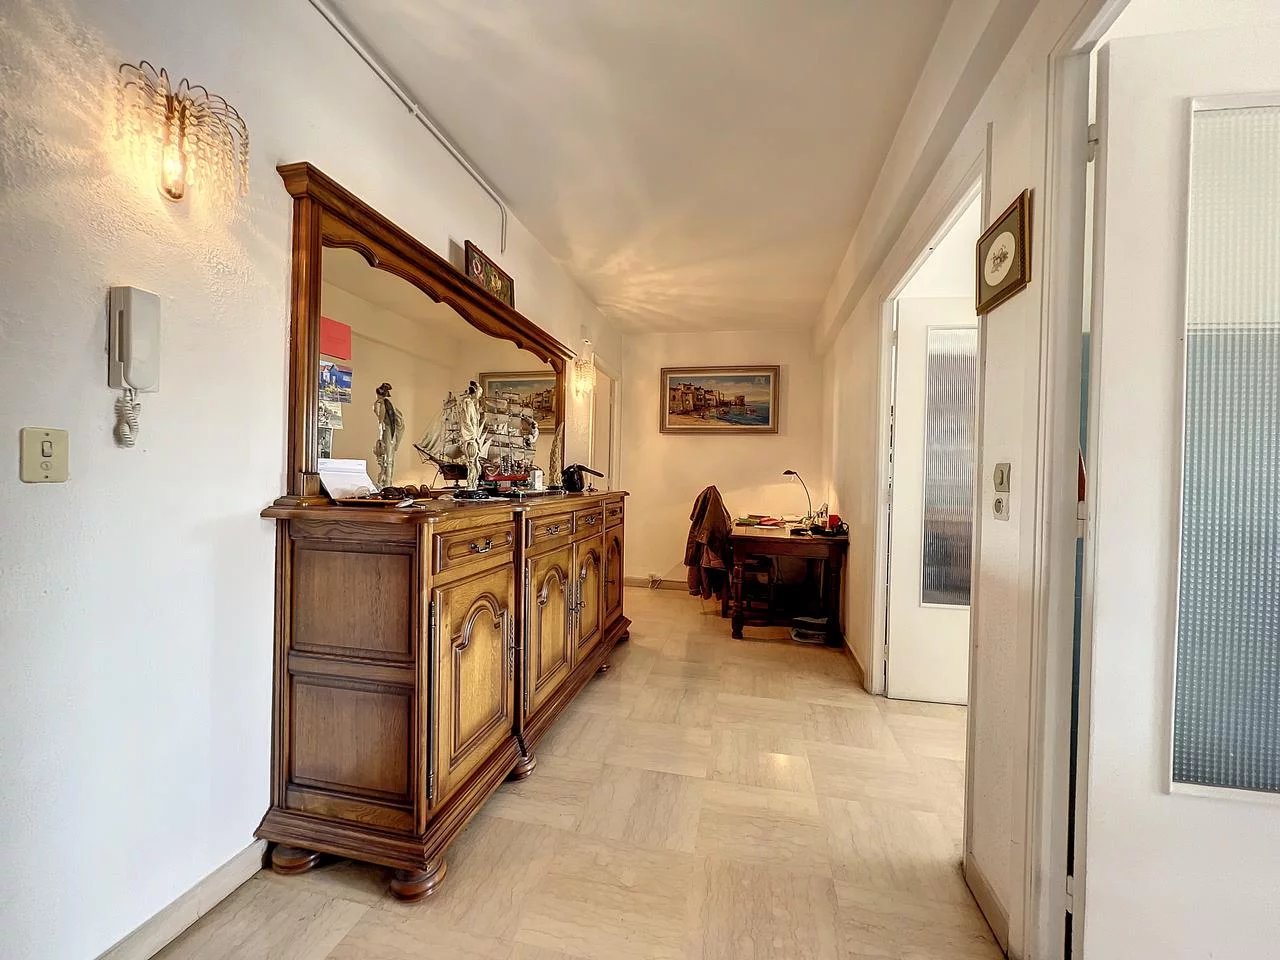 Appartement  2 Rooms 70.11m2  for sale   273 500 €